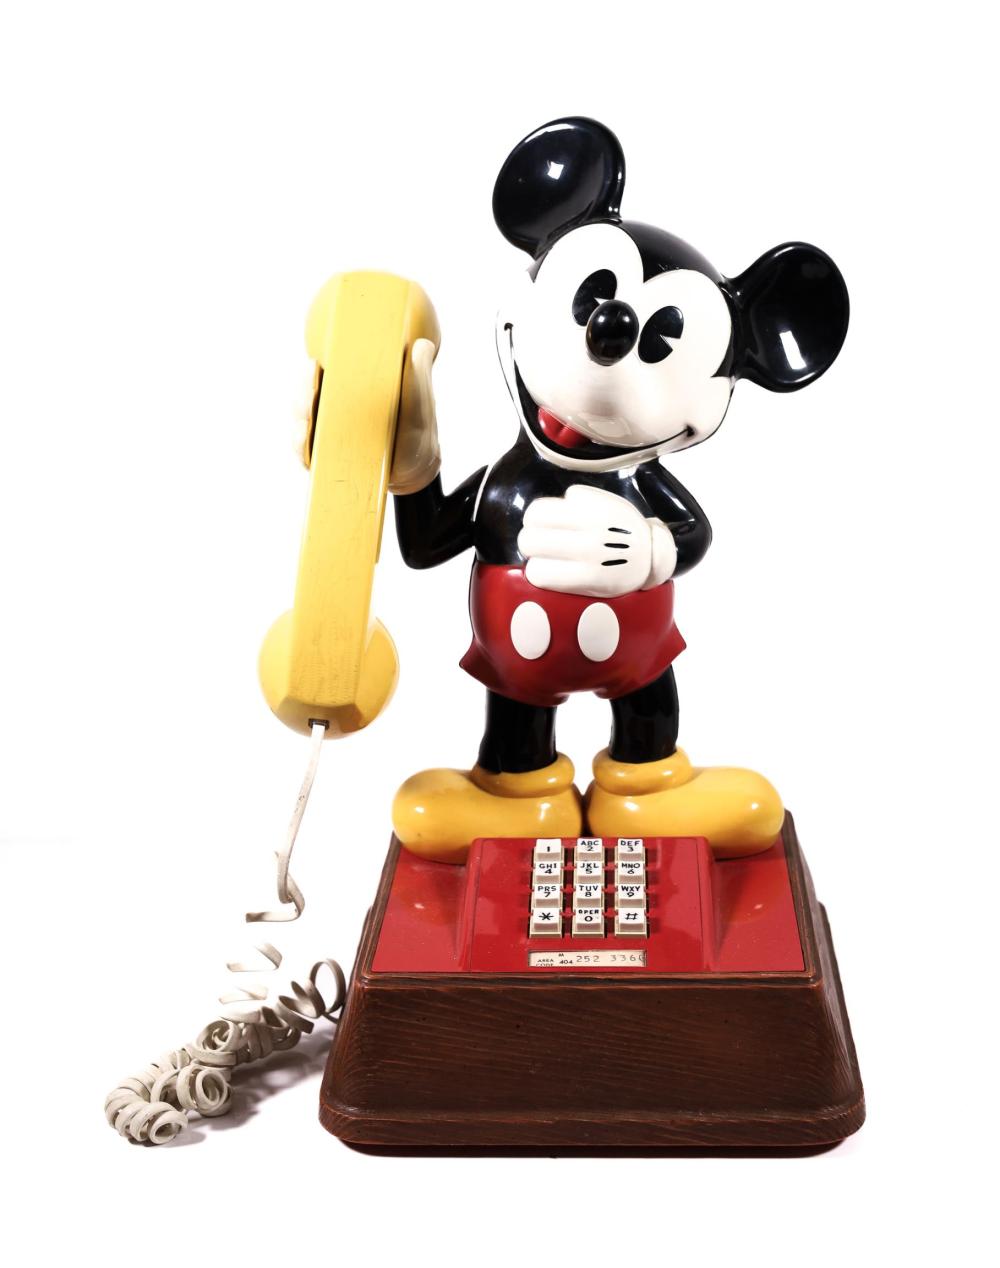 THE MICKEY MOUSE PHONE 1976 RETRO